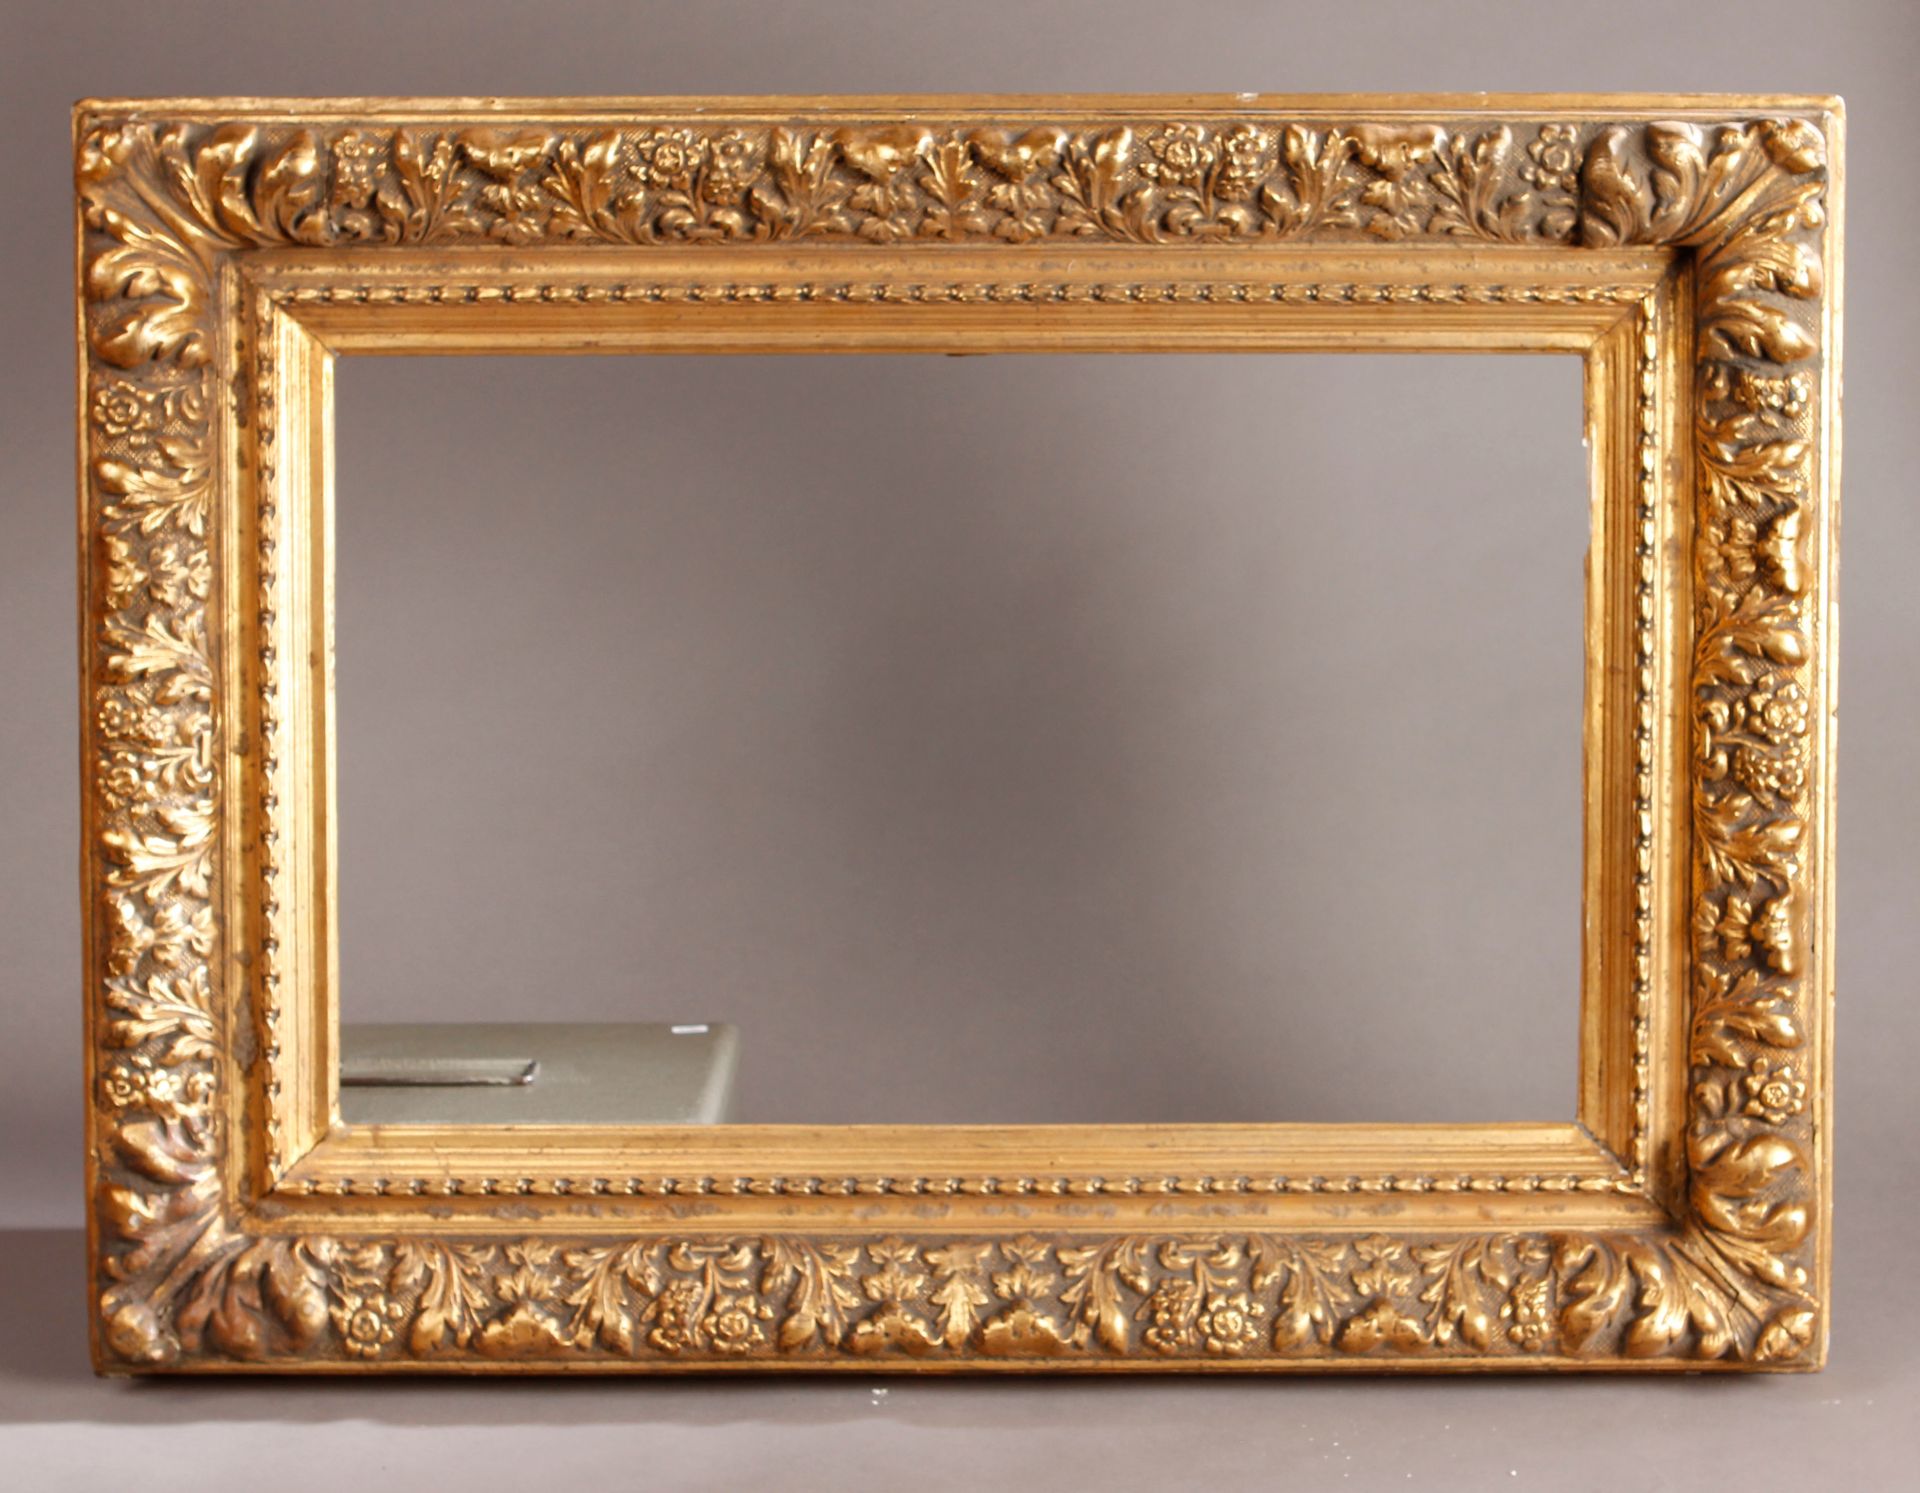 Null Wood and gilded stucco frame decorated with palmettes, leaves and flowers.
&hellip;